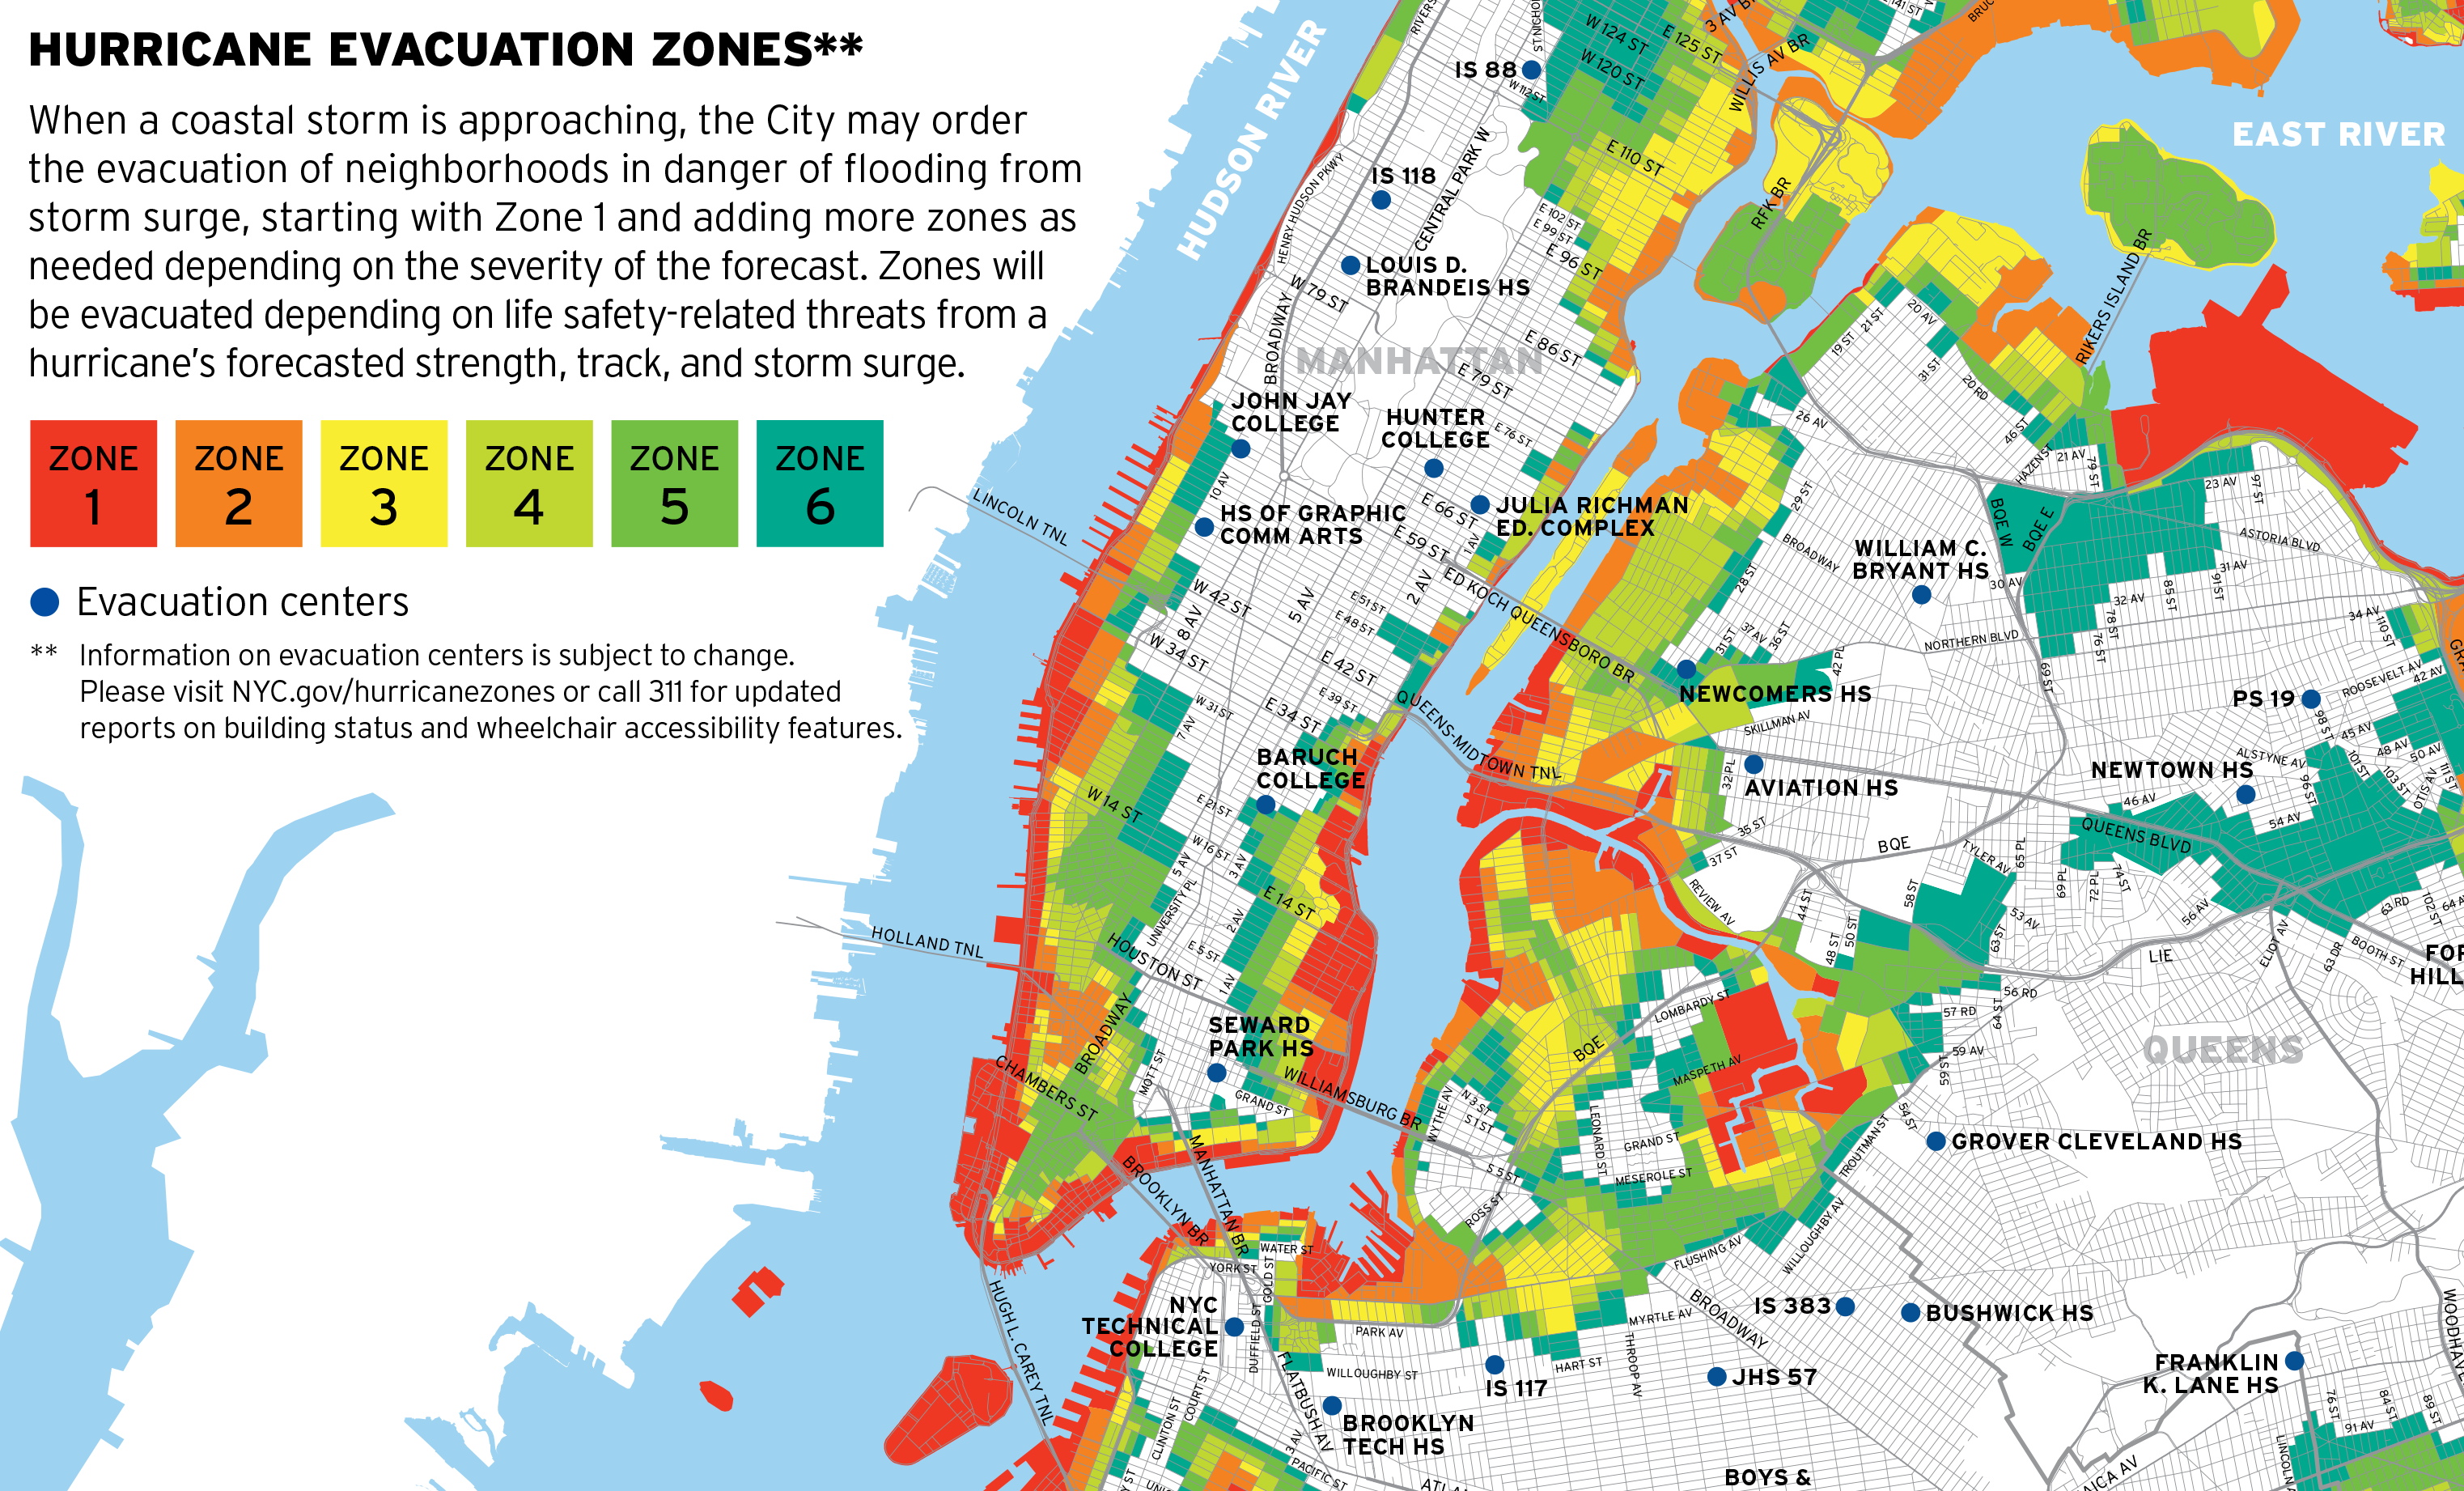 Project image 2 for Hurricane Map, New York City Office of Emergency Management